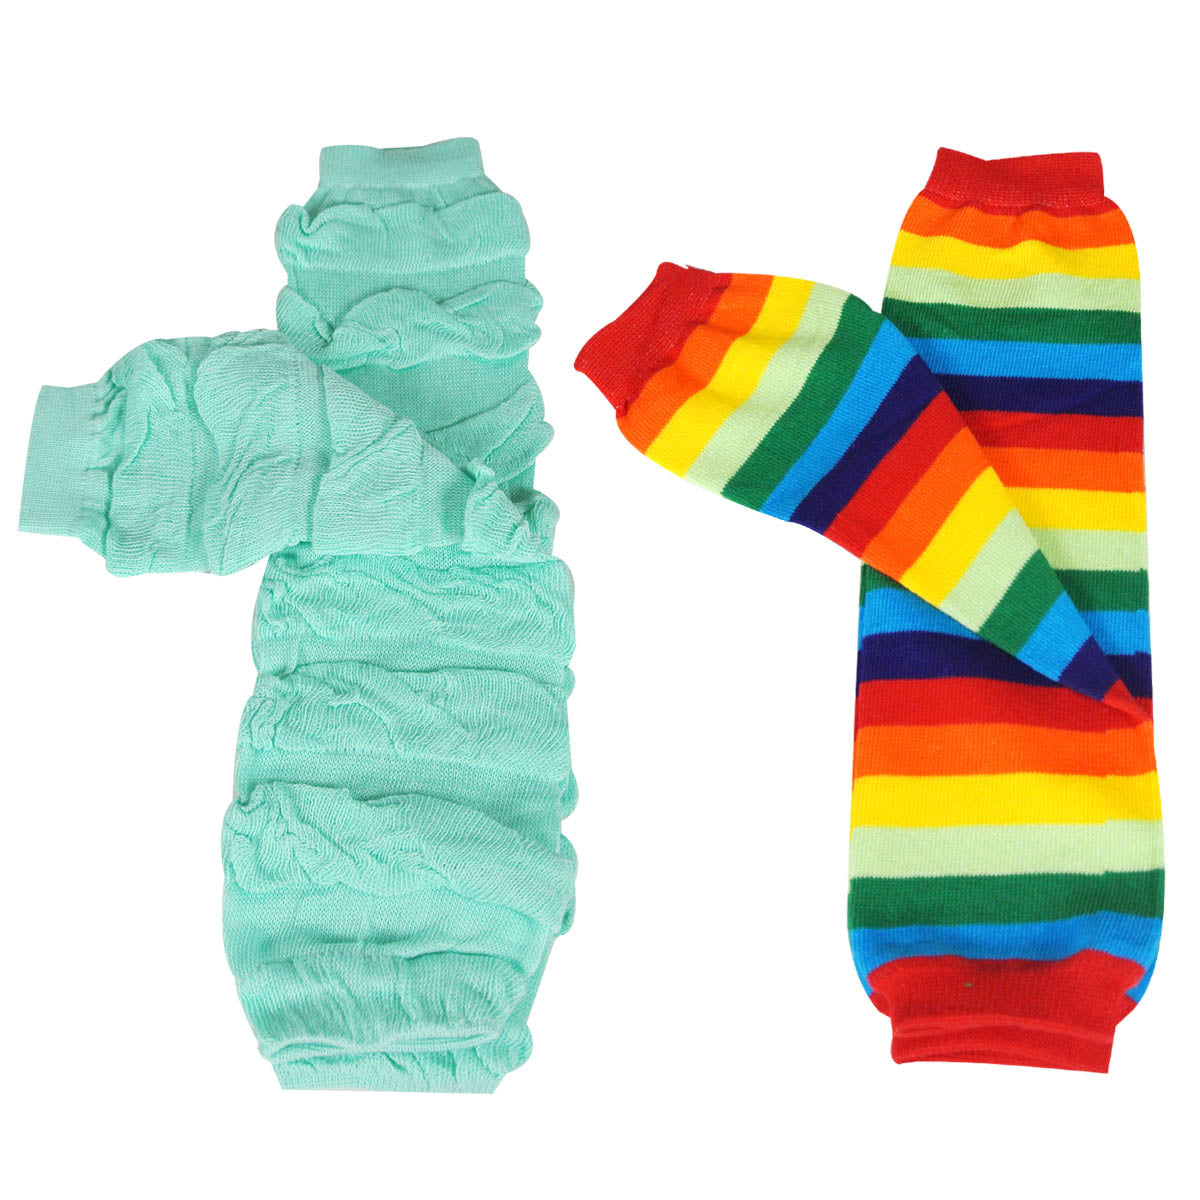 Wrapables Colorful Baby Leg Warmers (Set of 2)